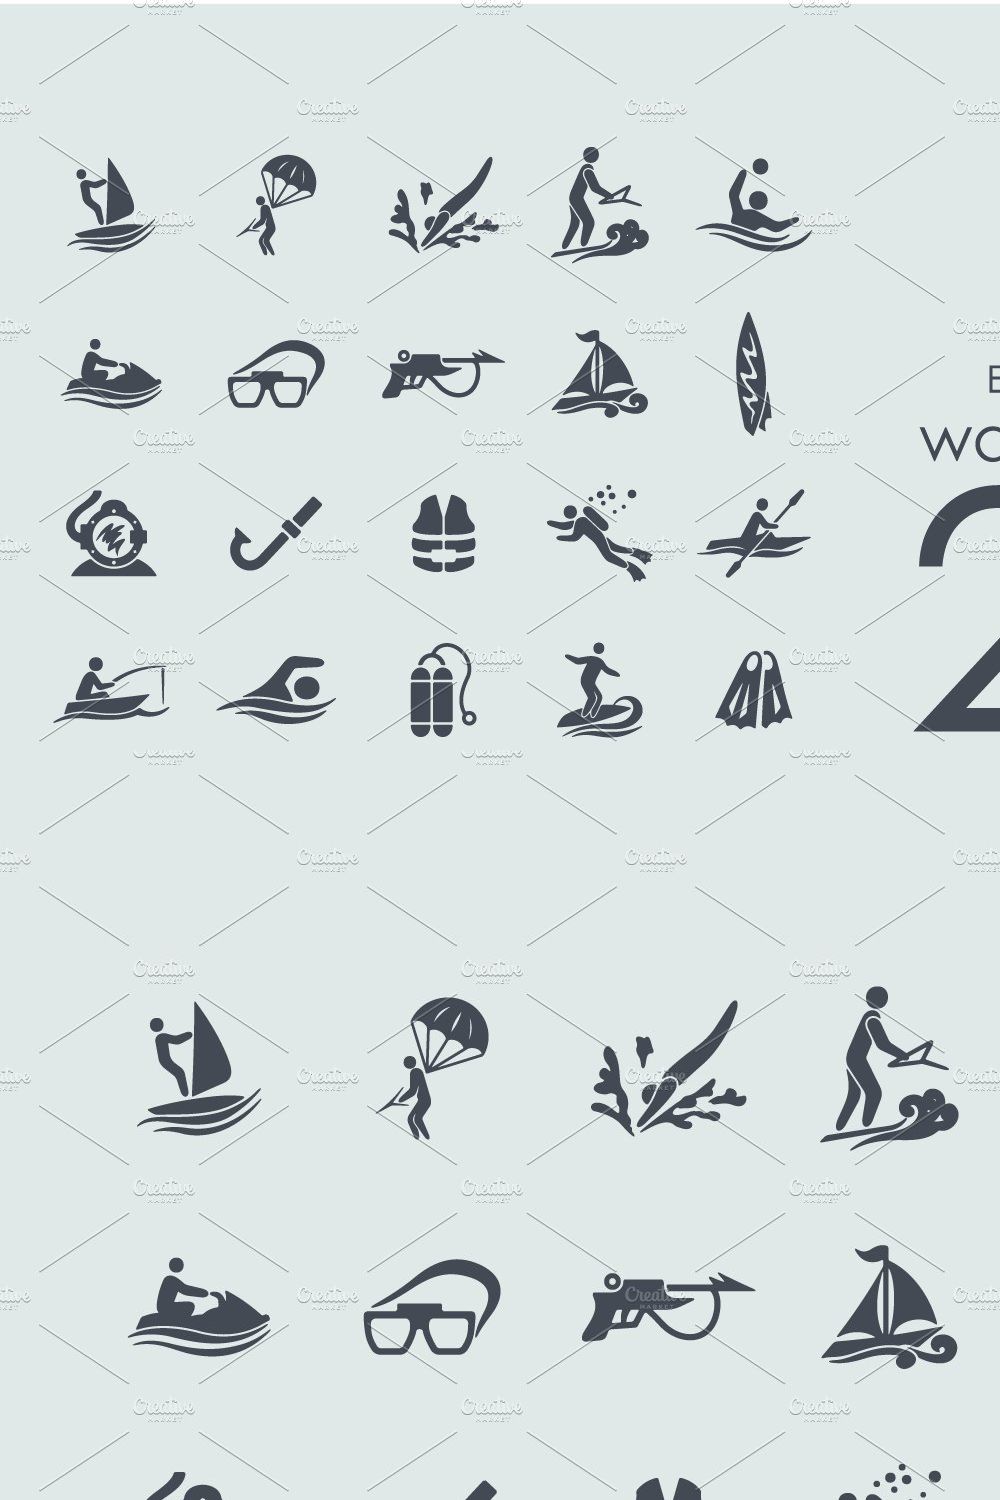 20 water sports icons pinterest preview image.